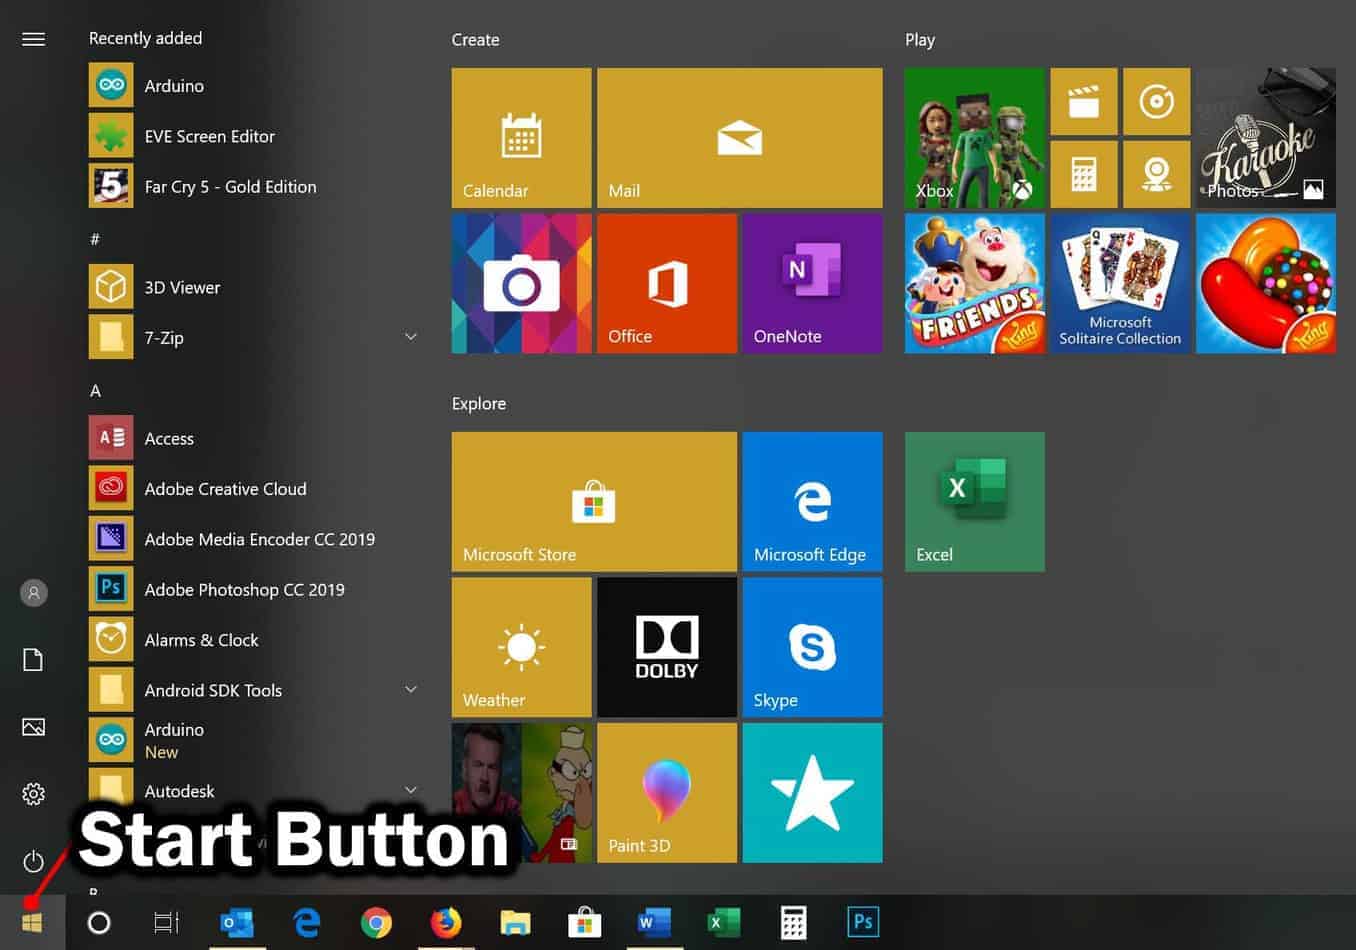 Step 1: Check Windows Version
Open Start menu by clicking on the Windows icon in the bottom-left corner of the screen.